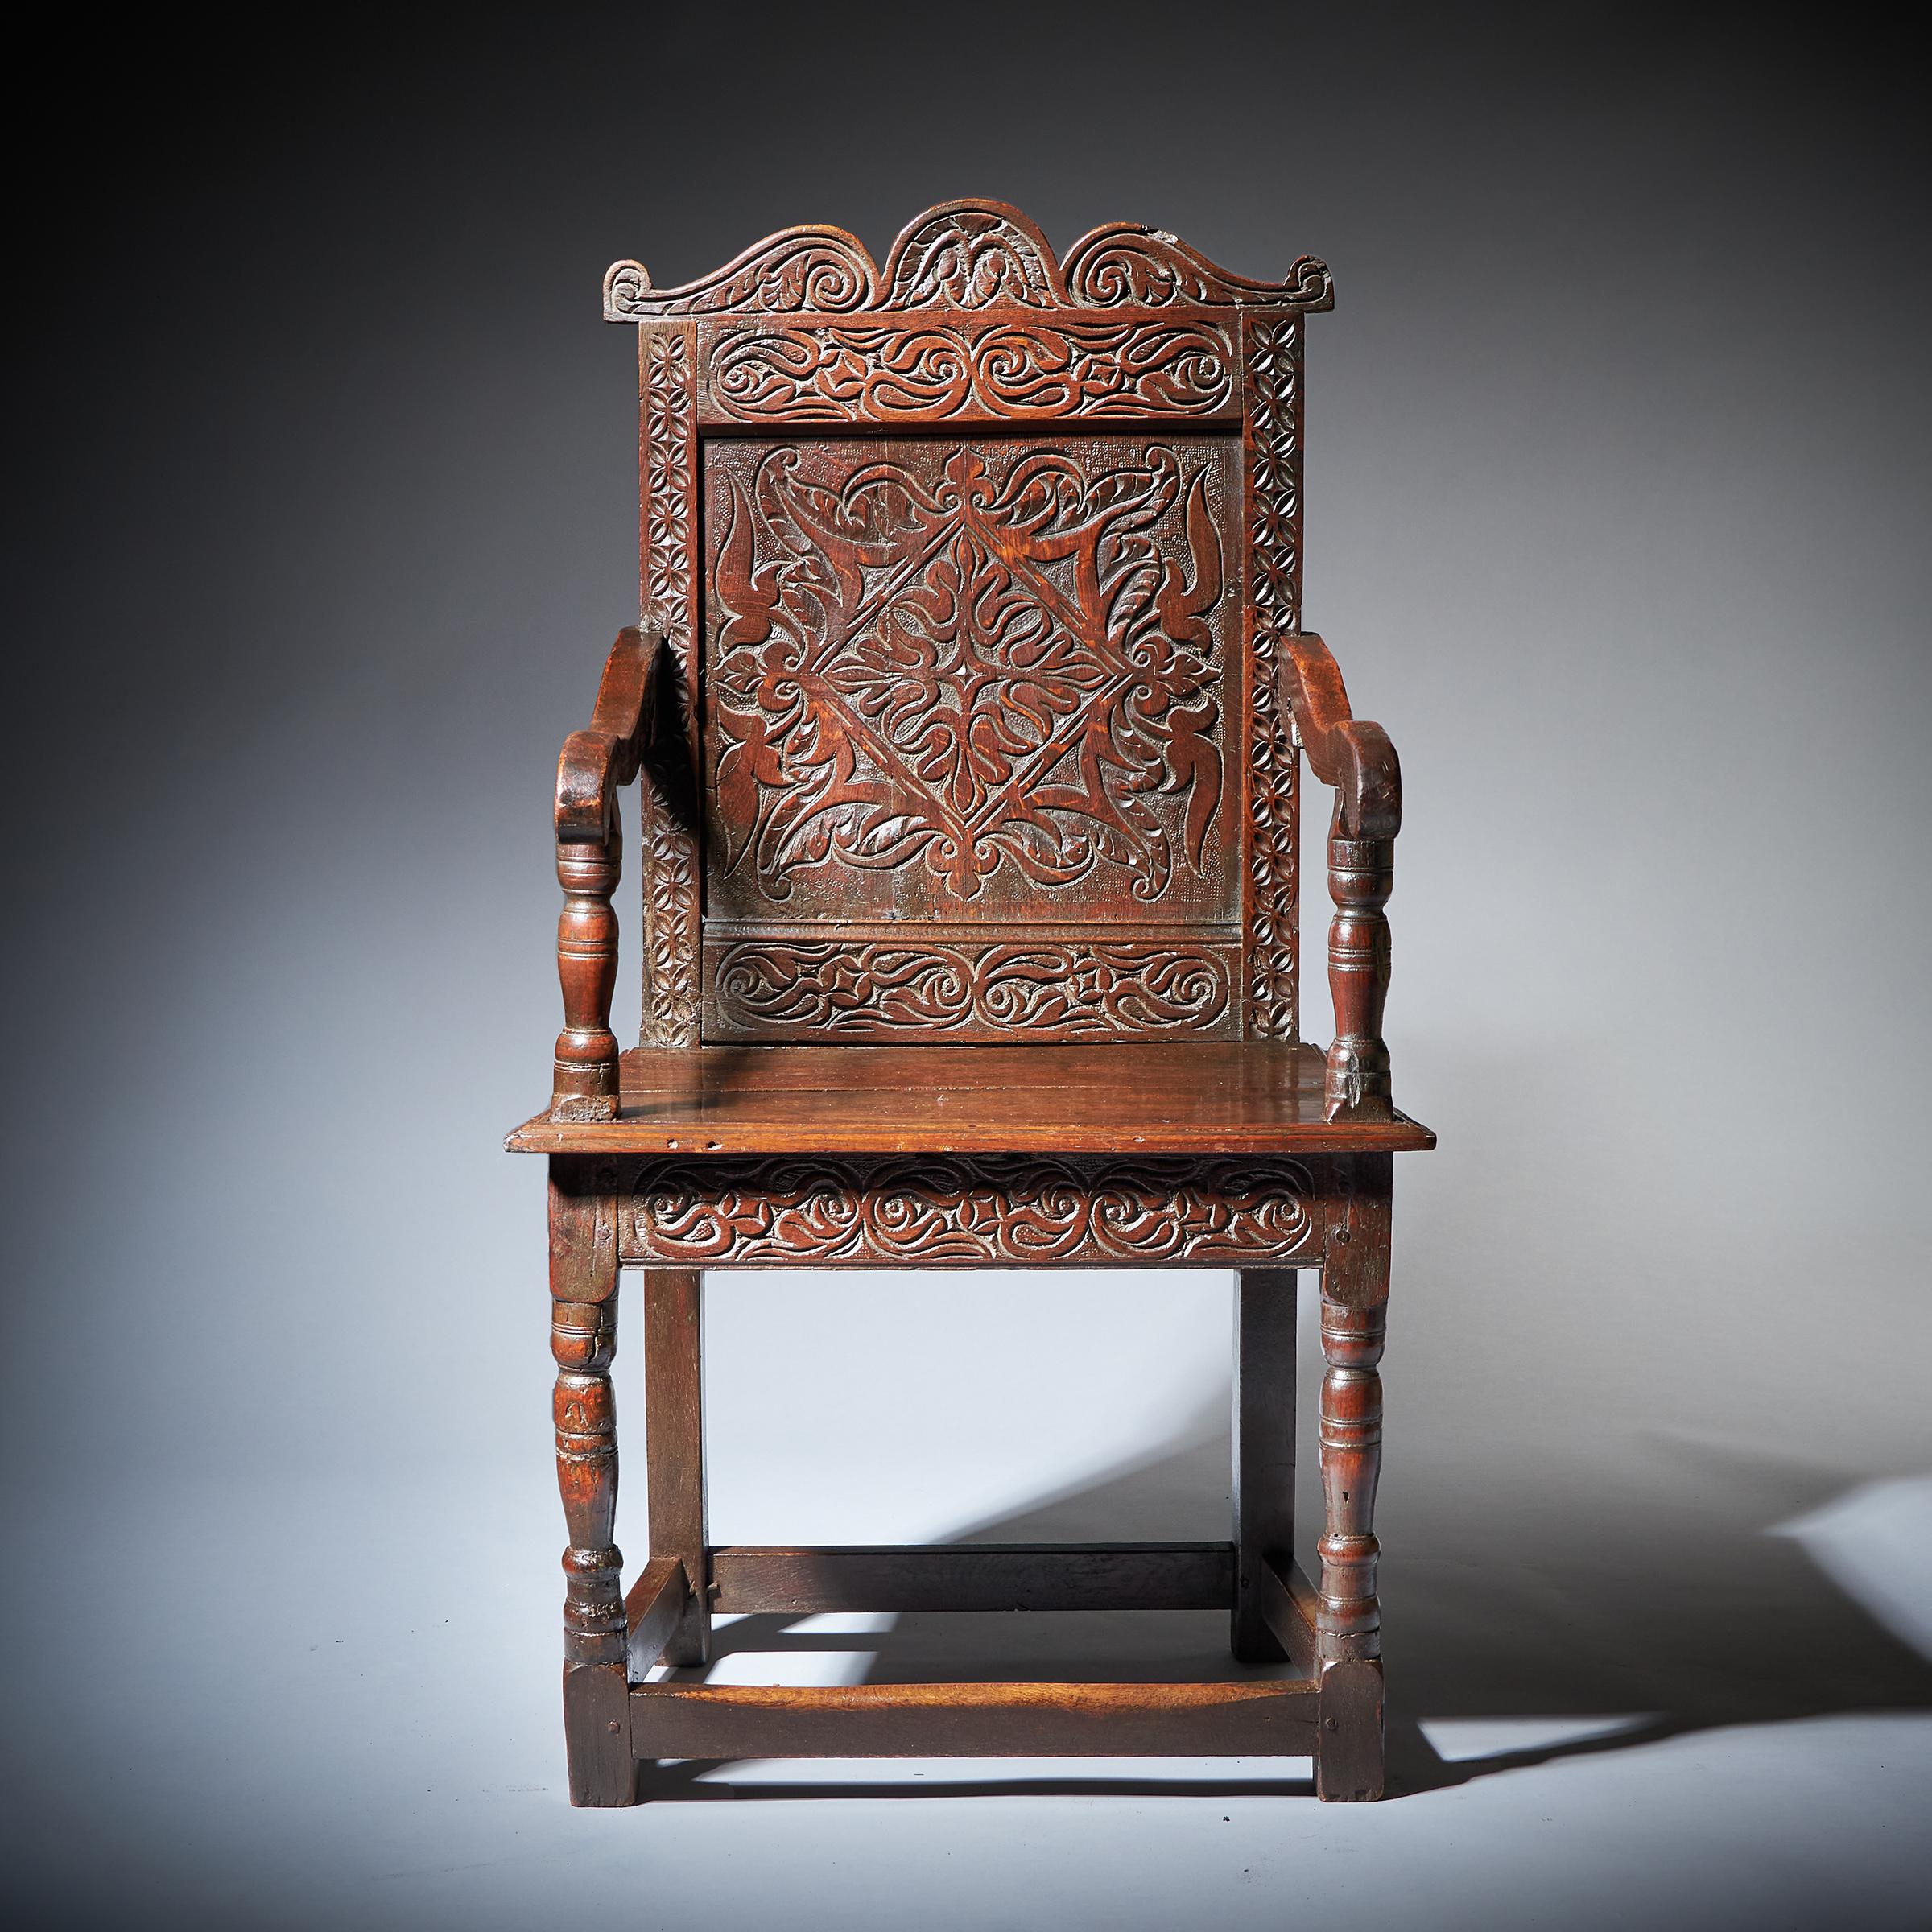 A superb and original carved Wainscot armchair, circa 1660. Yorkshire

This superb Wainscot chair dates from the middle of the 17th century and is most likely from the Leeds area of Yorkshire, with a large lozenge-designed panel to the back and